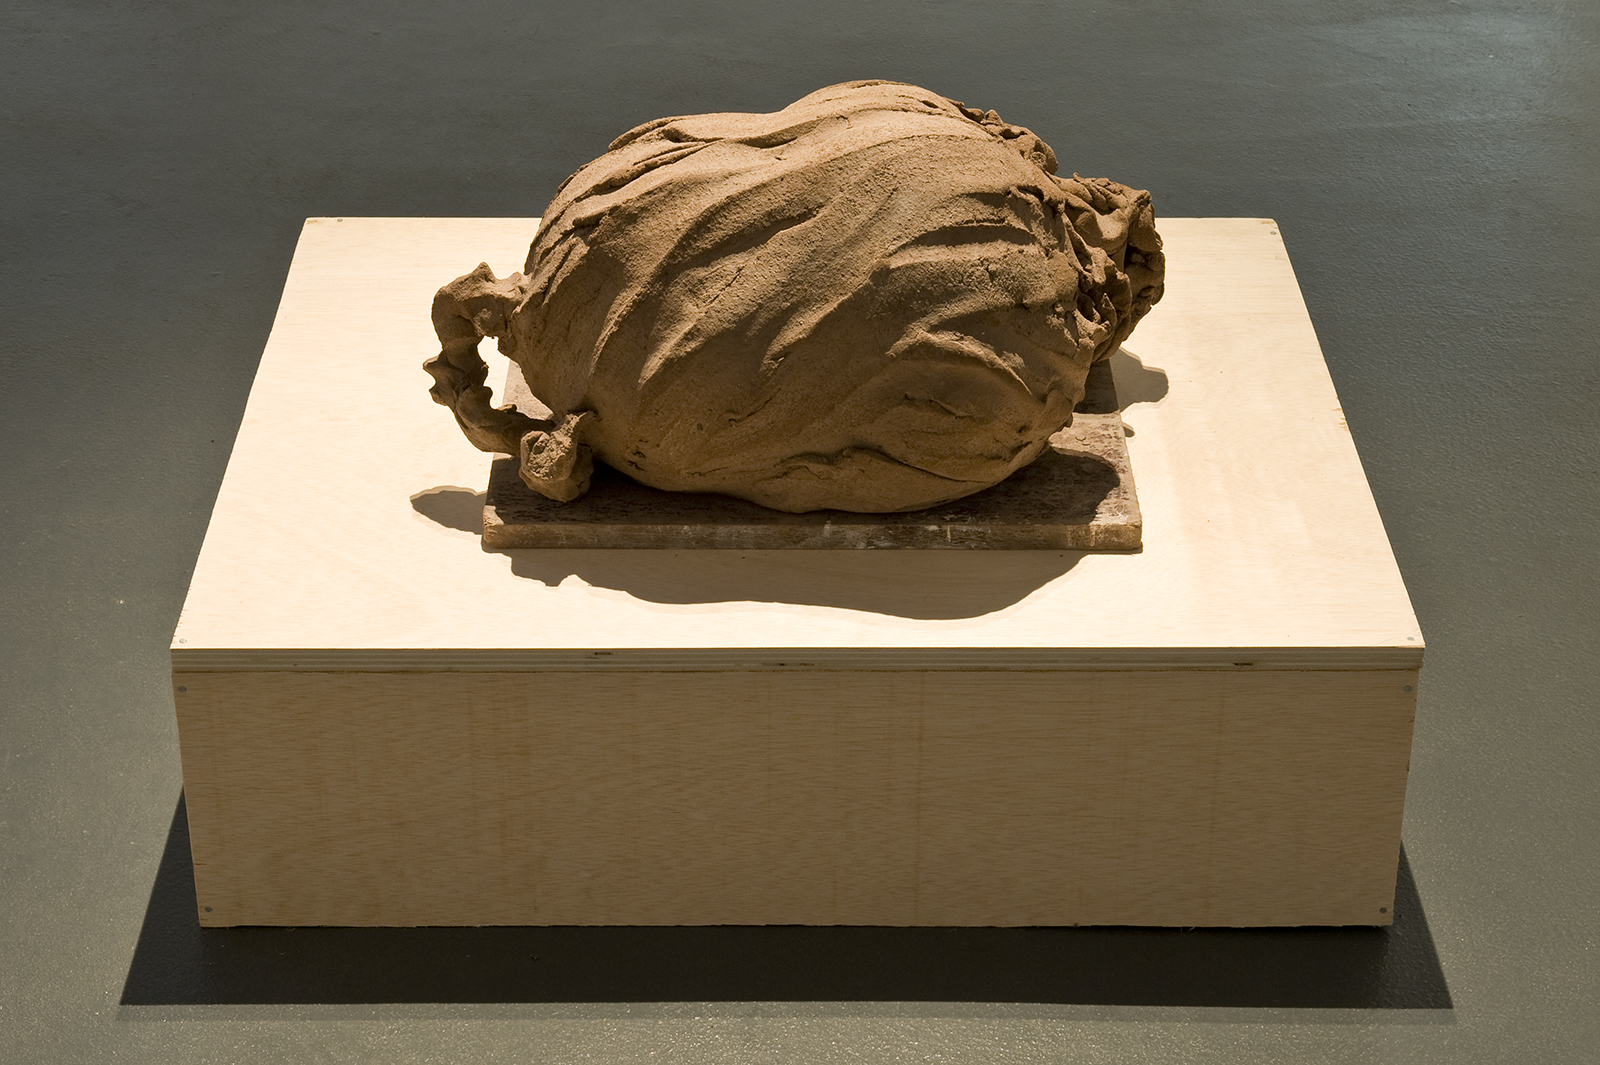 <p>Tending to a feeling of detachment_2014, 30x40x56.5 cm, unfired clay and wood</p>
